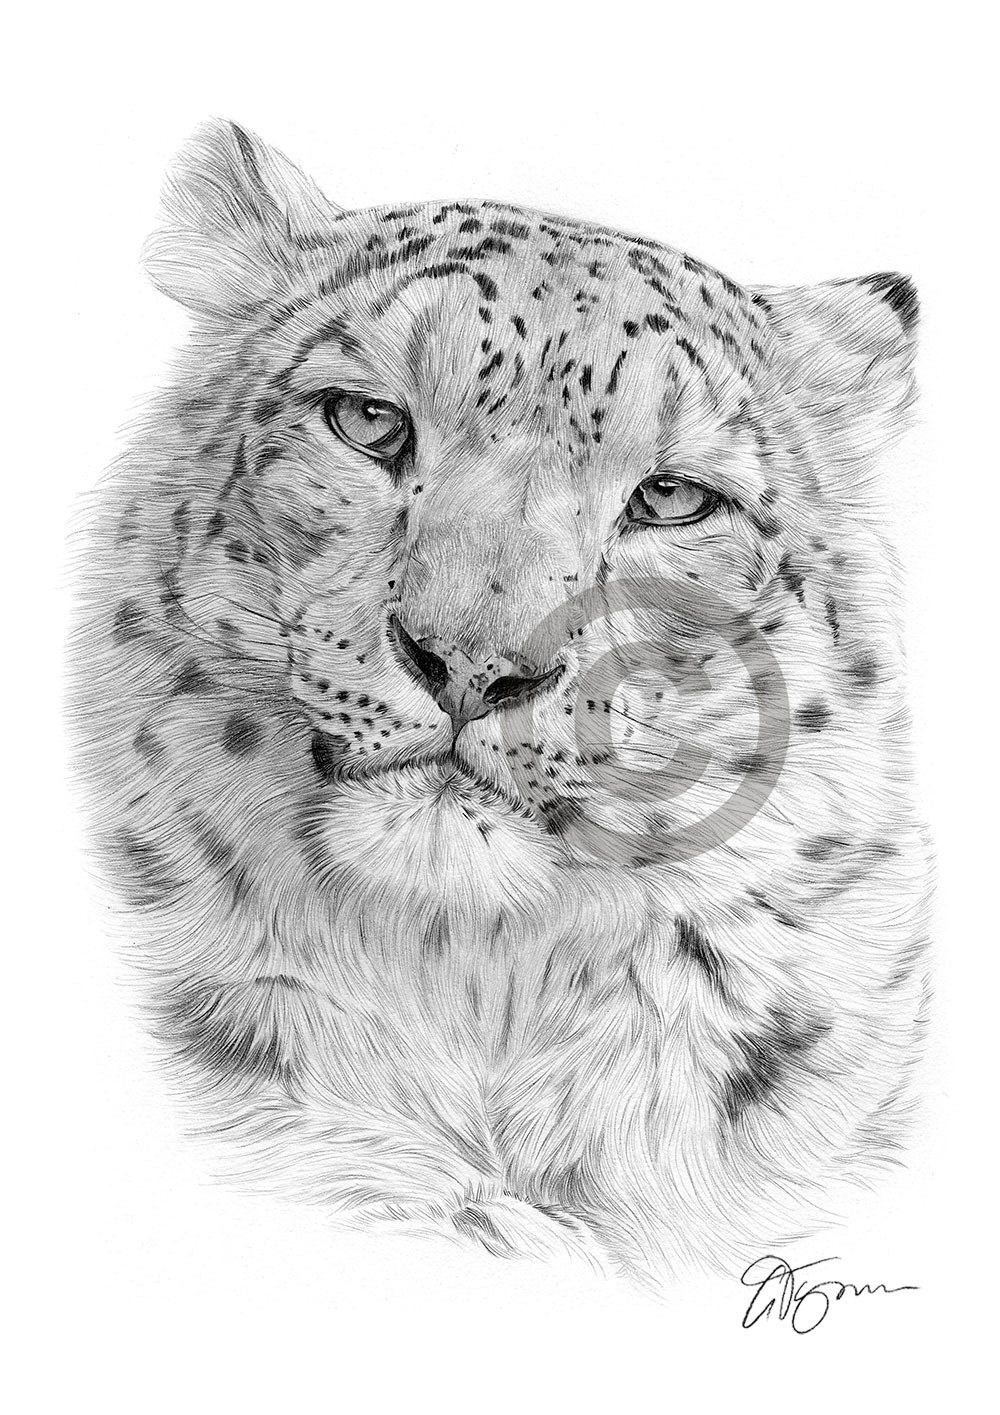 Pencil drawing of a snow leopard by UK artist Gary Tymon